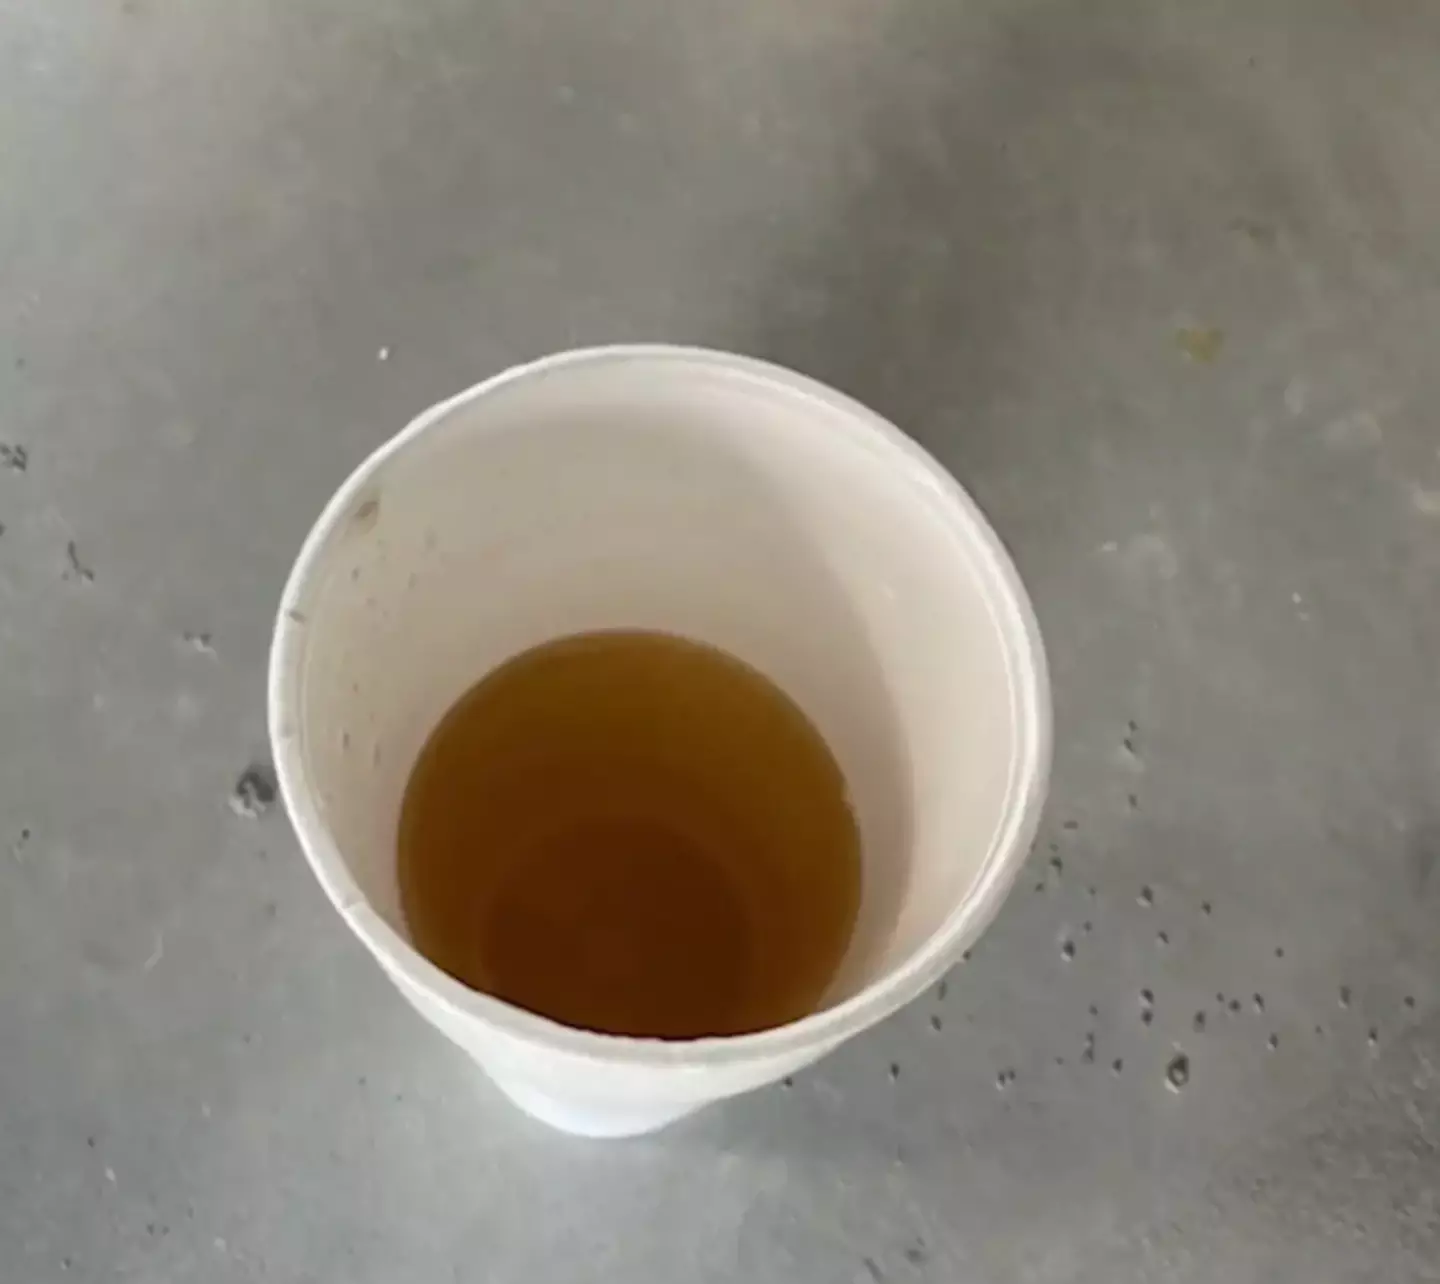 The cup was full of urine.